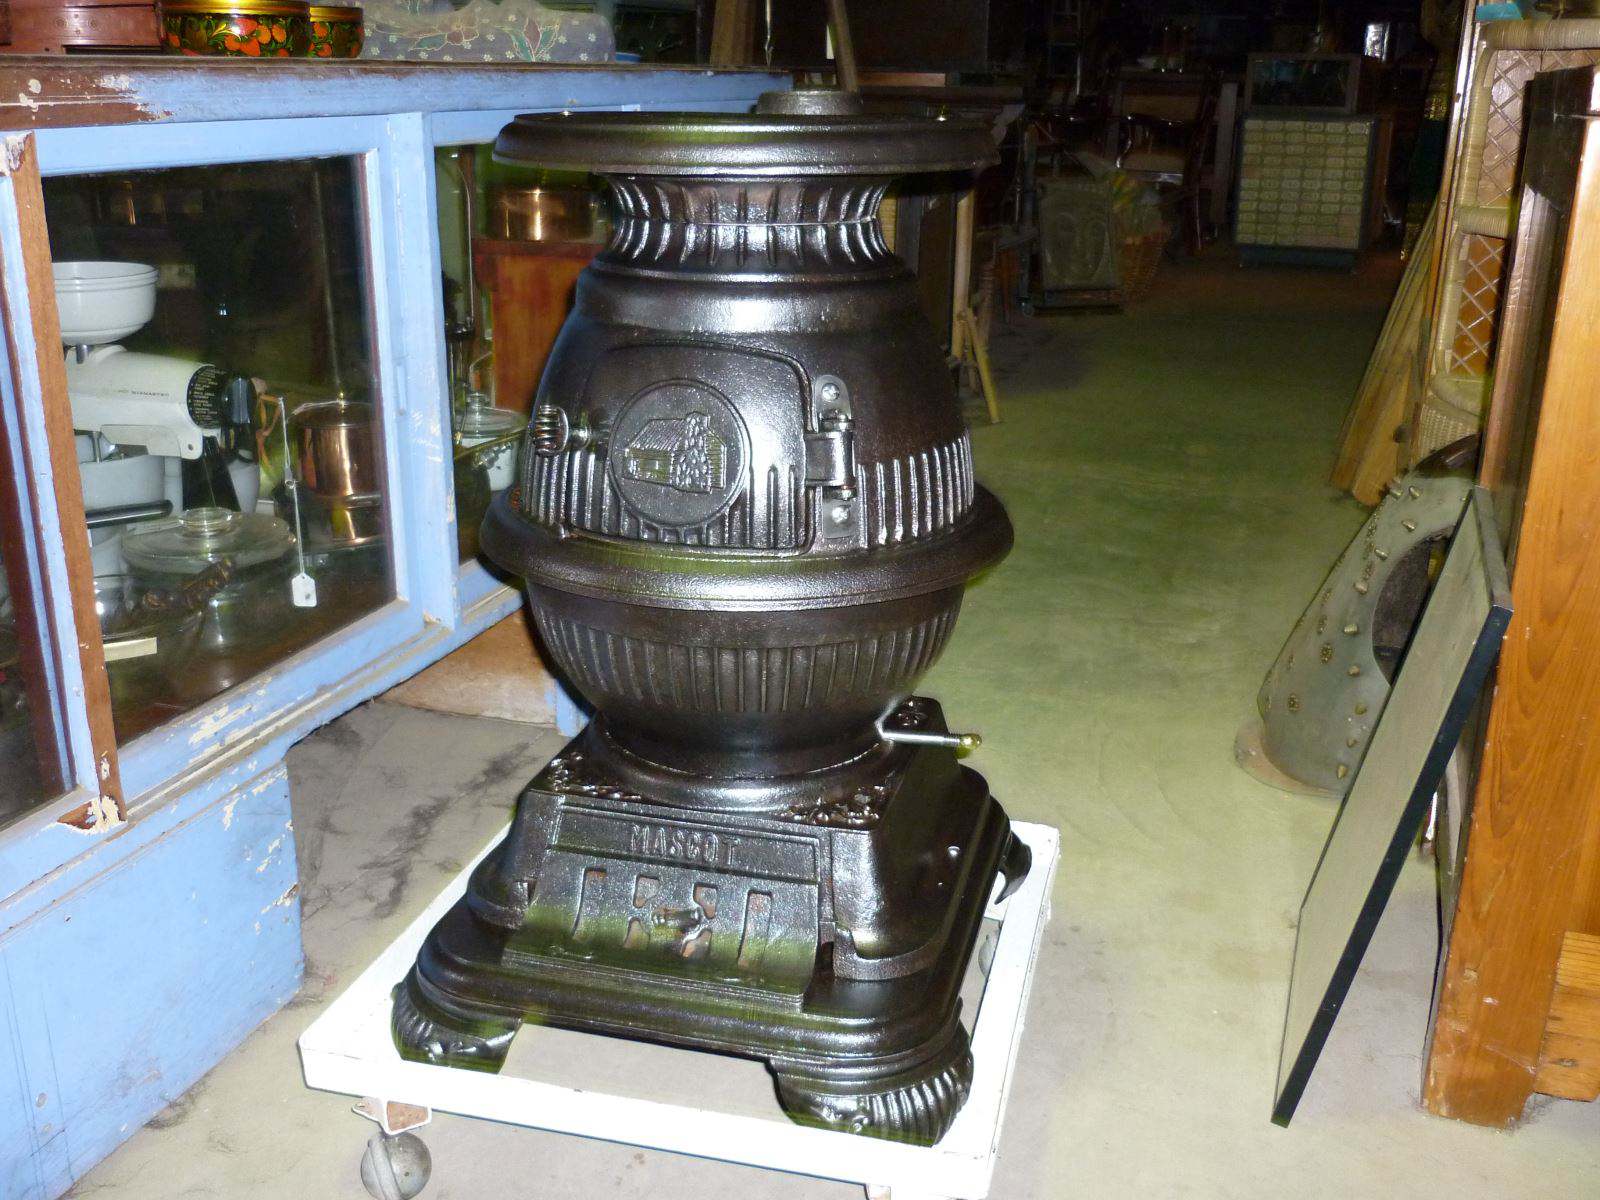 Restored Pot Belly Stove/Heater